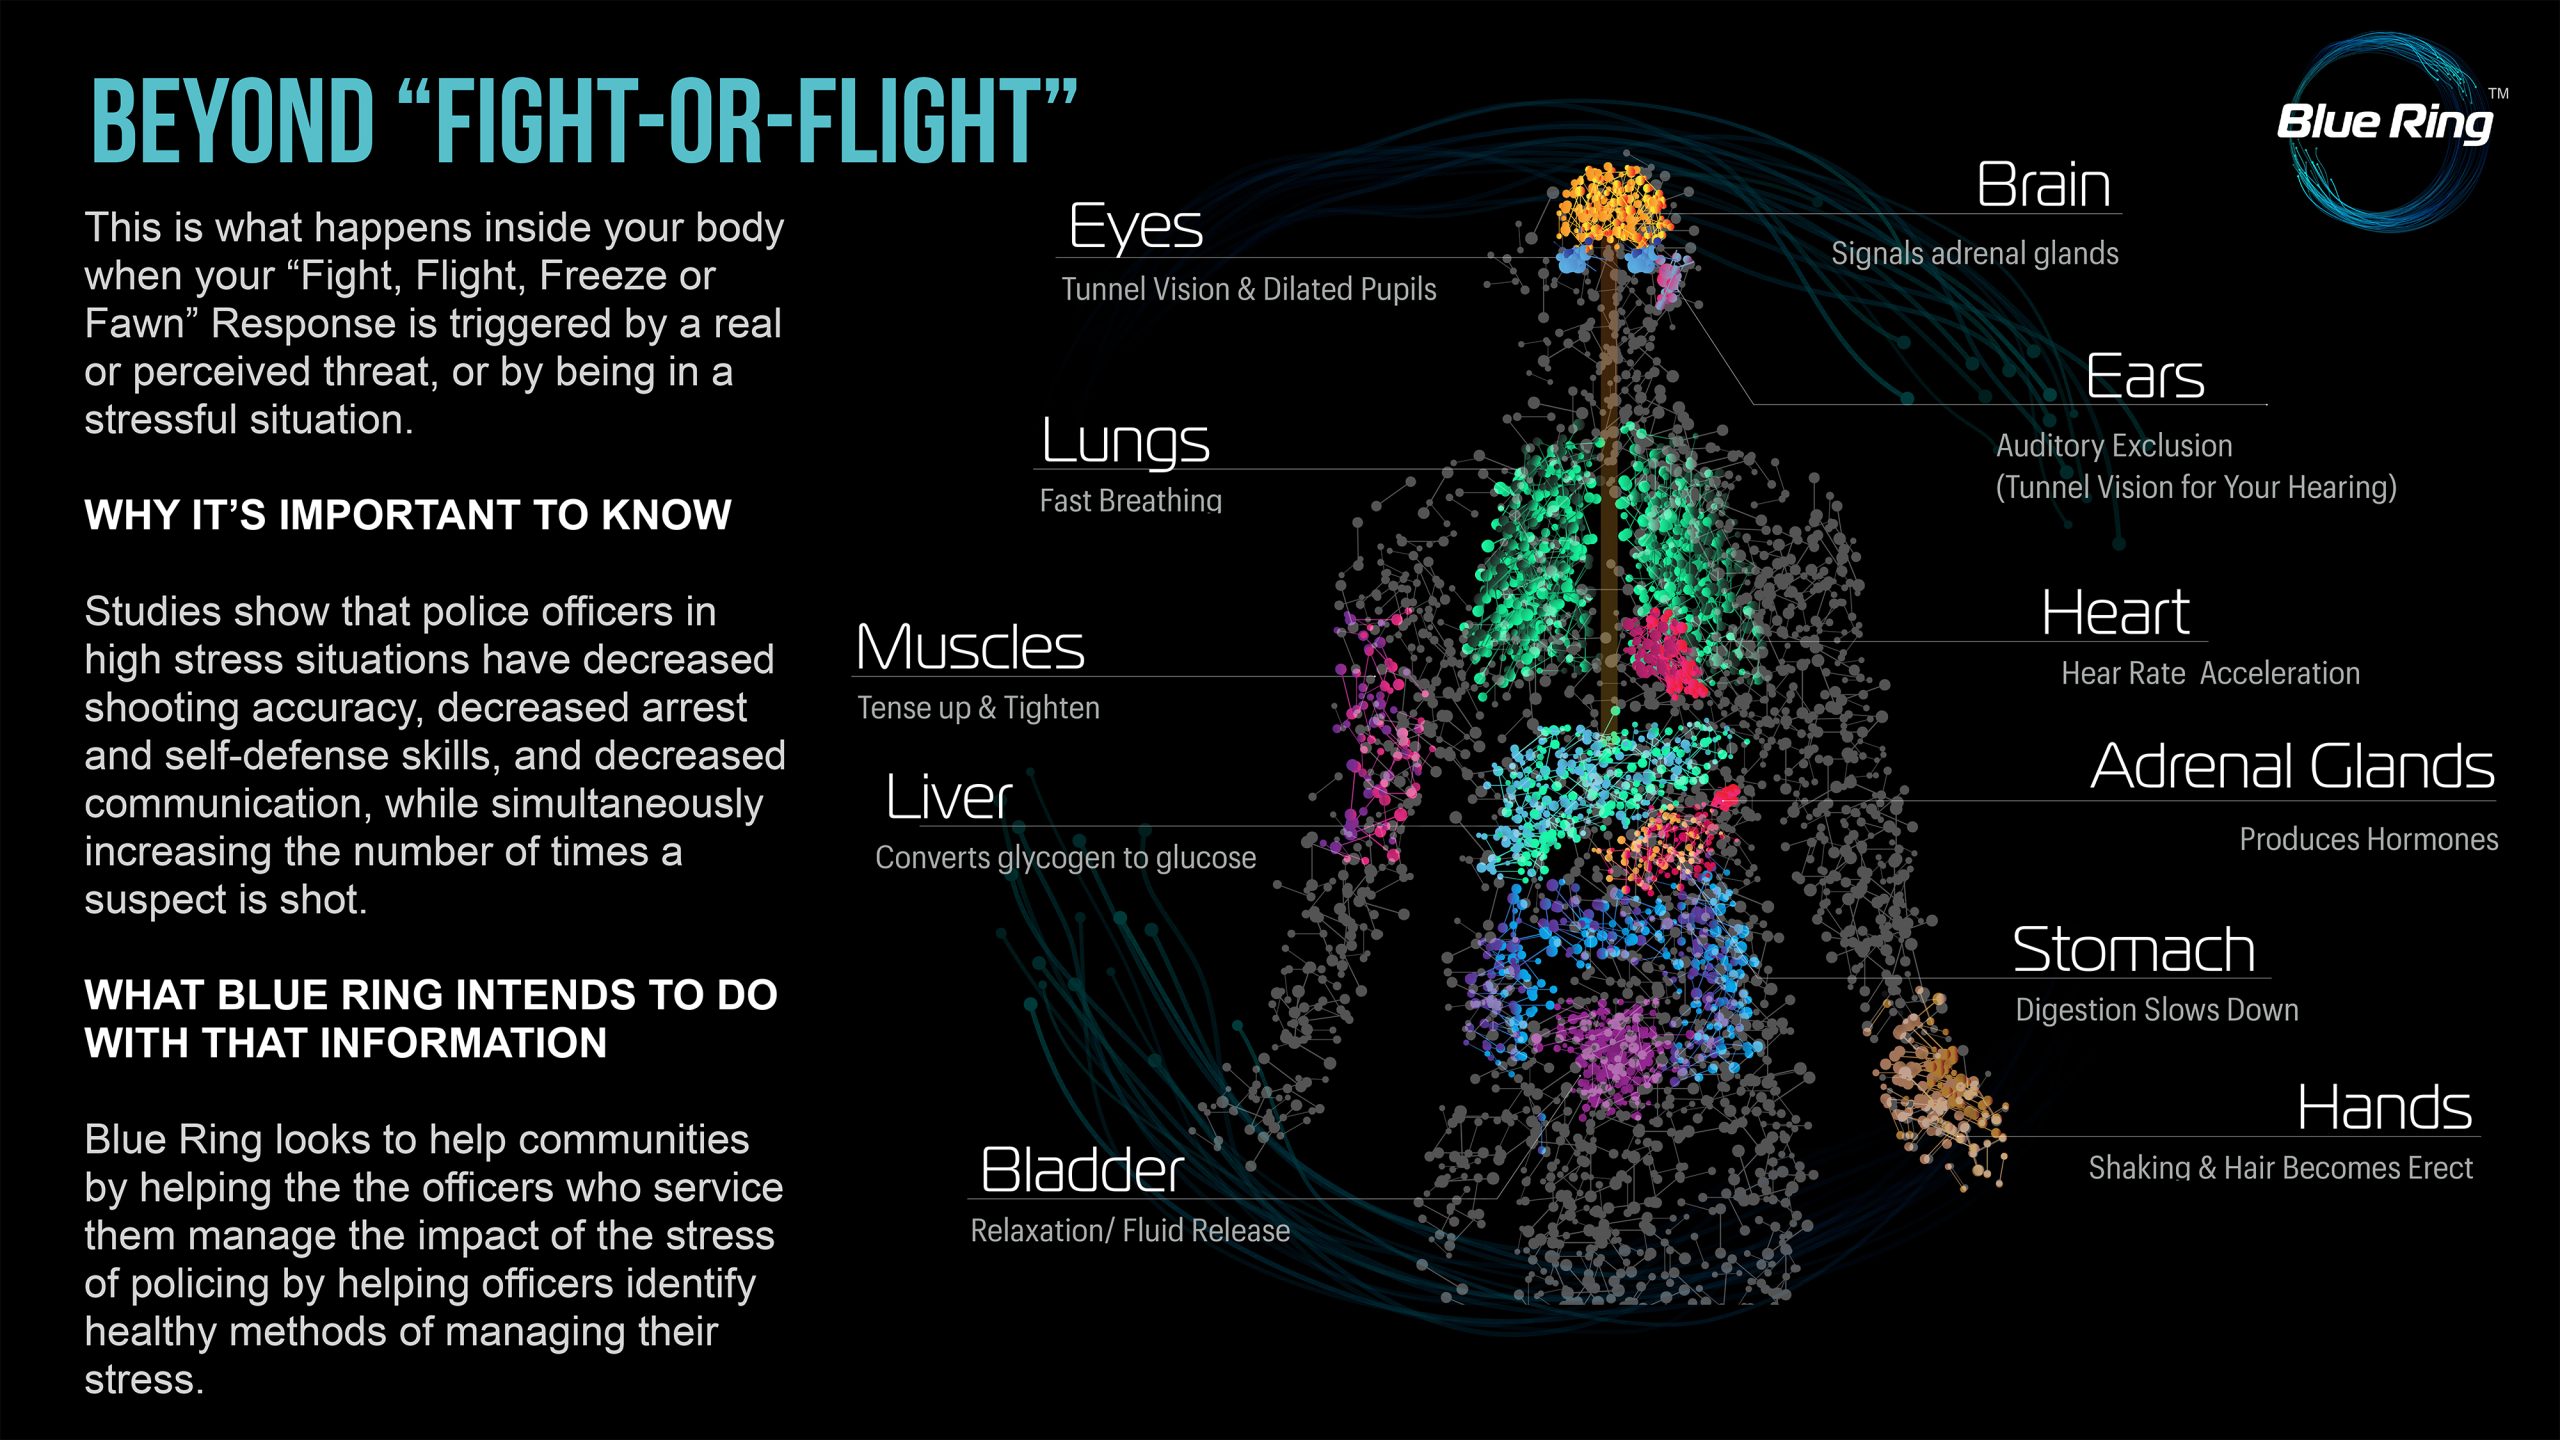 A digital diagram shows body systems in different colors and their responses in Fight or Flight situations with text labels. Text on the left explains Blue Ring technology for managing police responses to fight or flight situations.